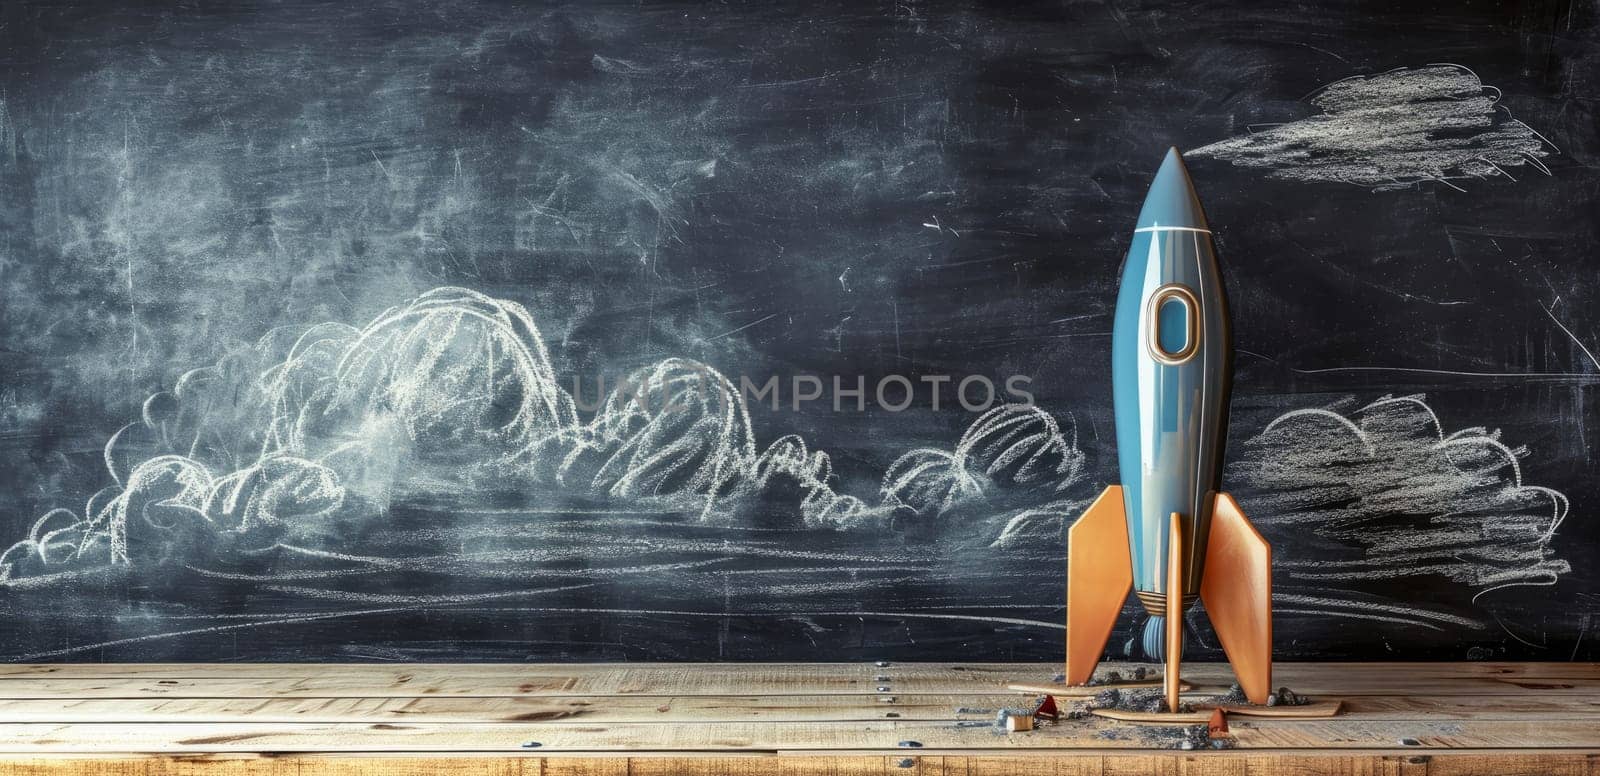 Rocket ship model on wooden table against chalkboard with cloud drawings